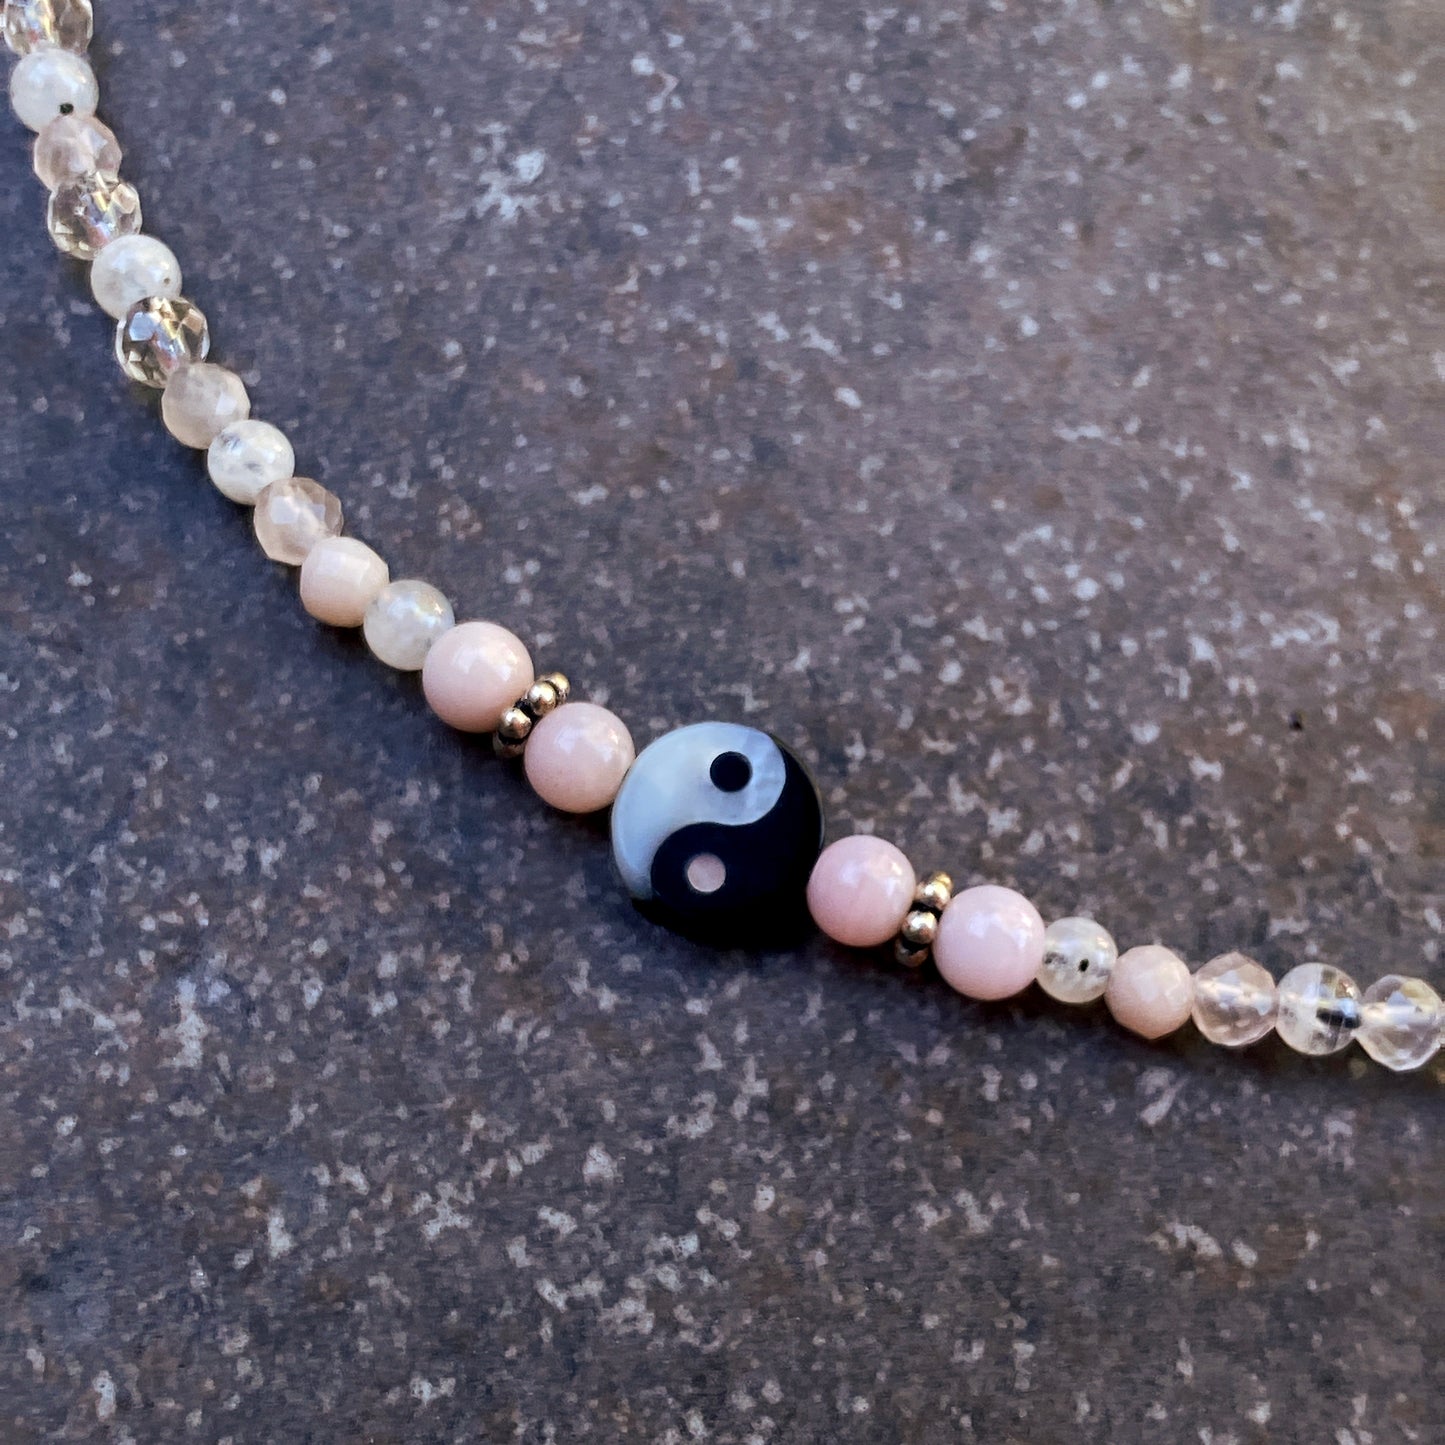 Mother of Pearl and gemstone Sterling silver Yin Yang Choker